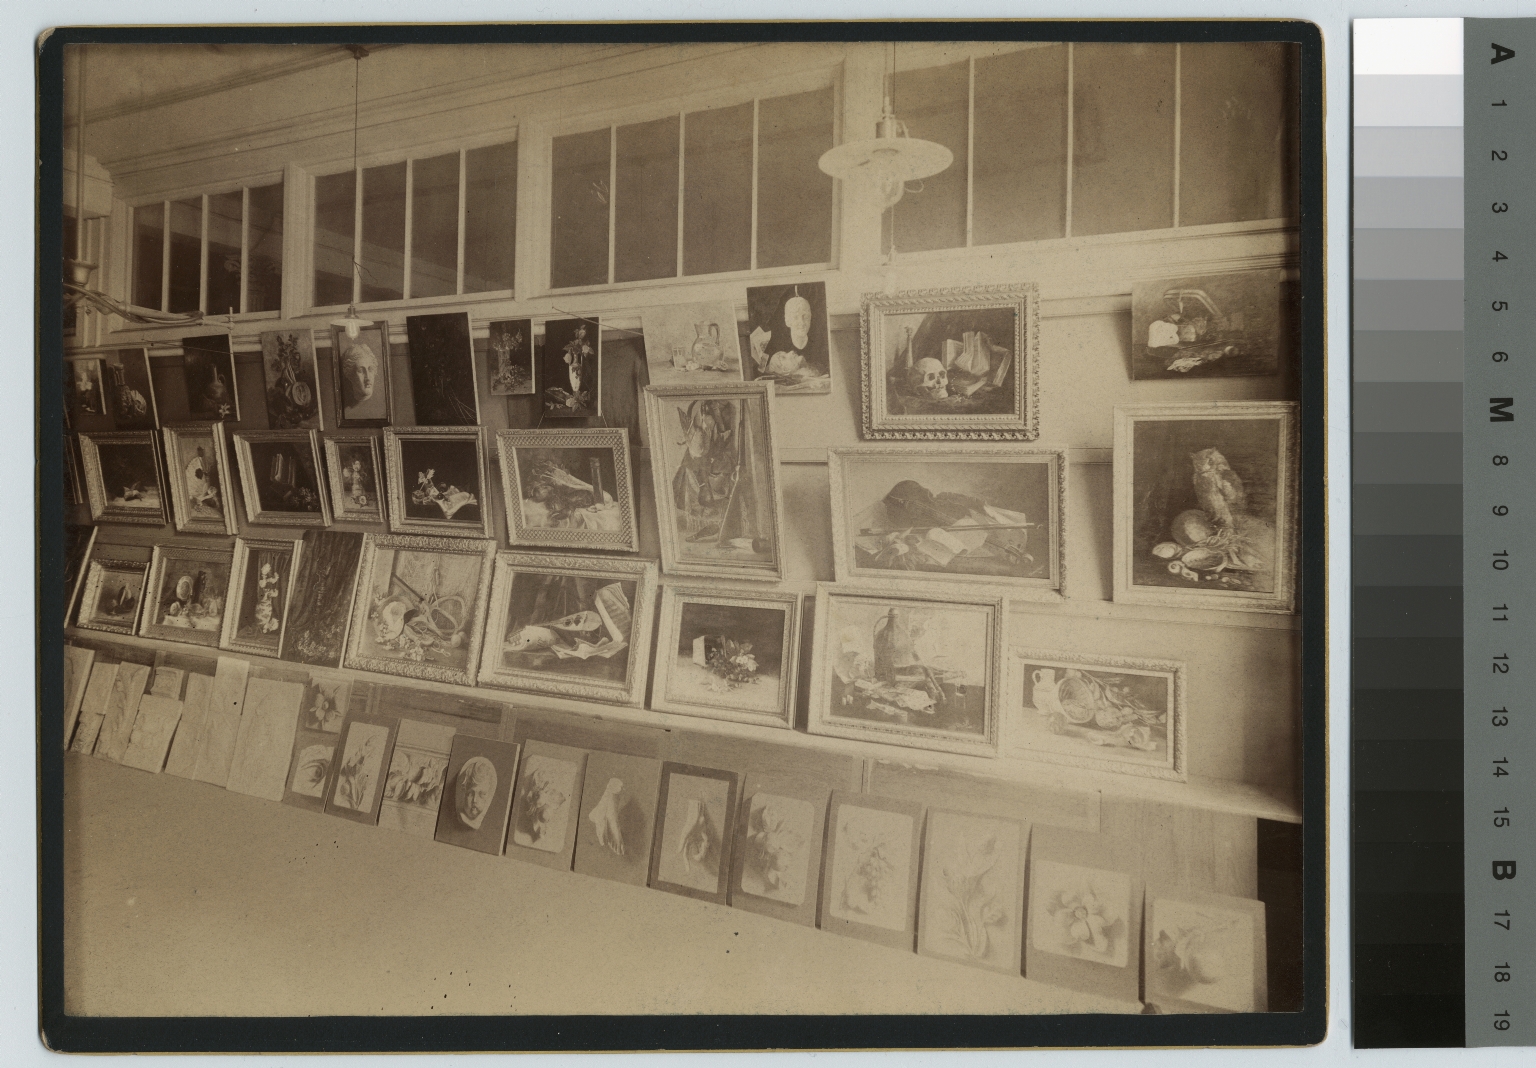 Academics, art and design, interior view of an exhibition of student painting, [1900-1910]